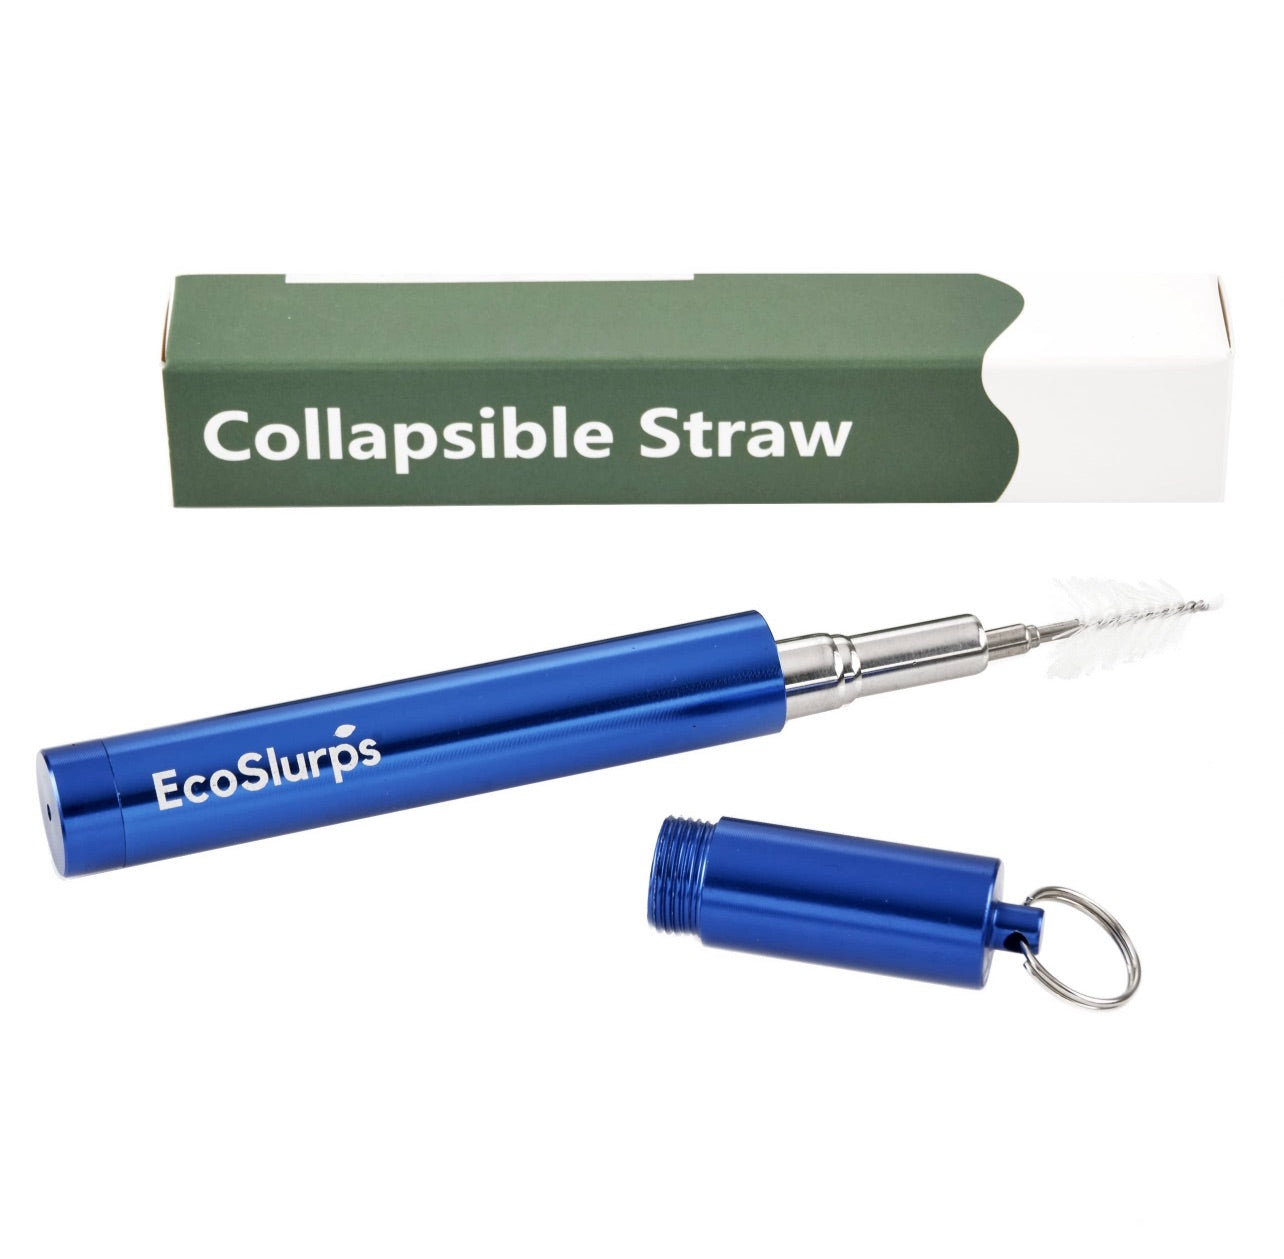 Reusable Collapsible Straw